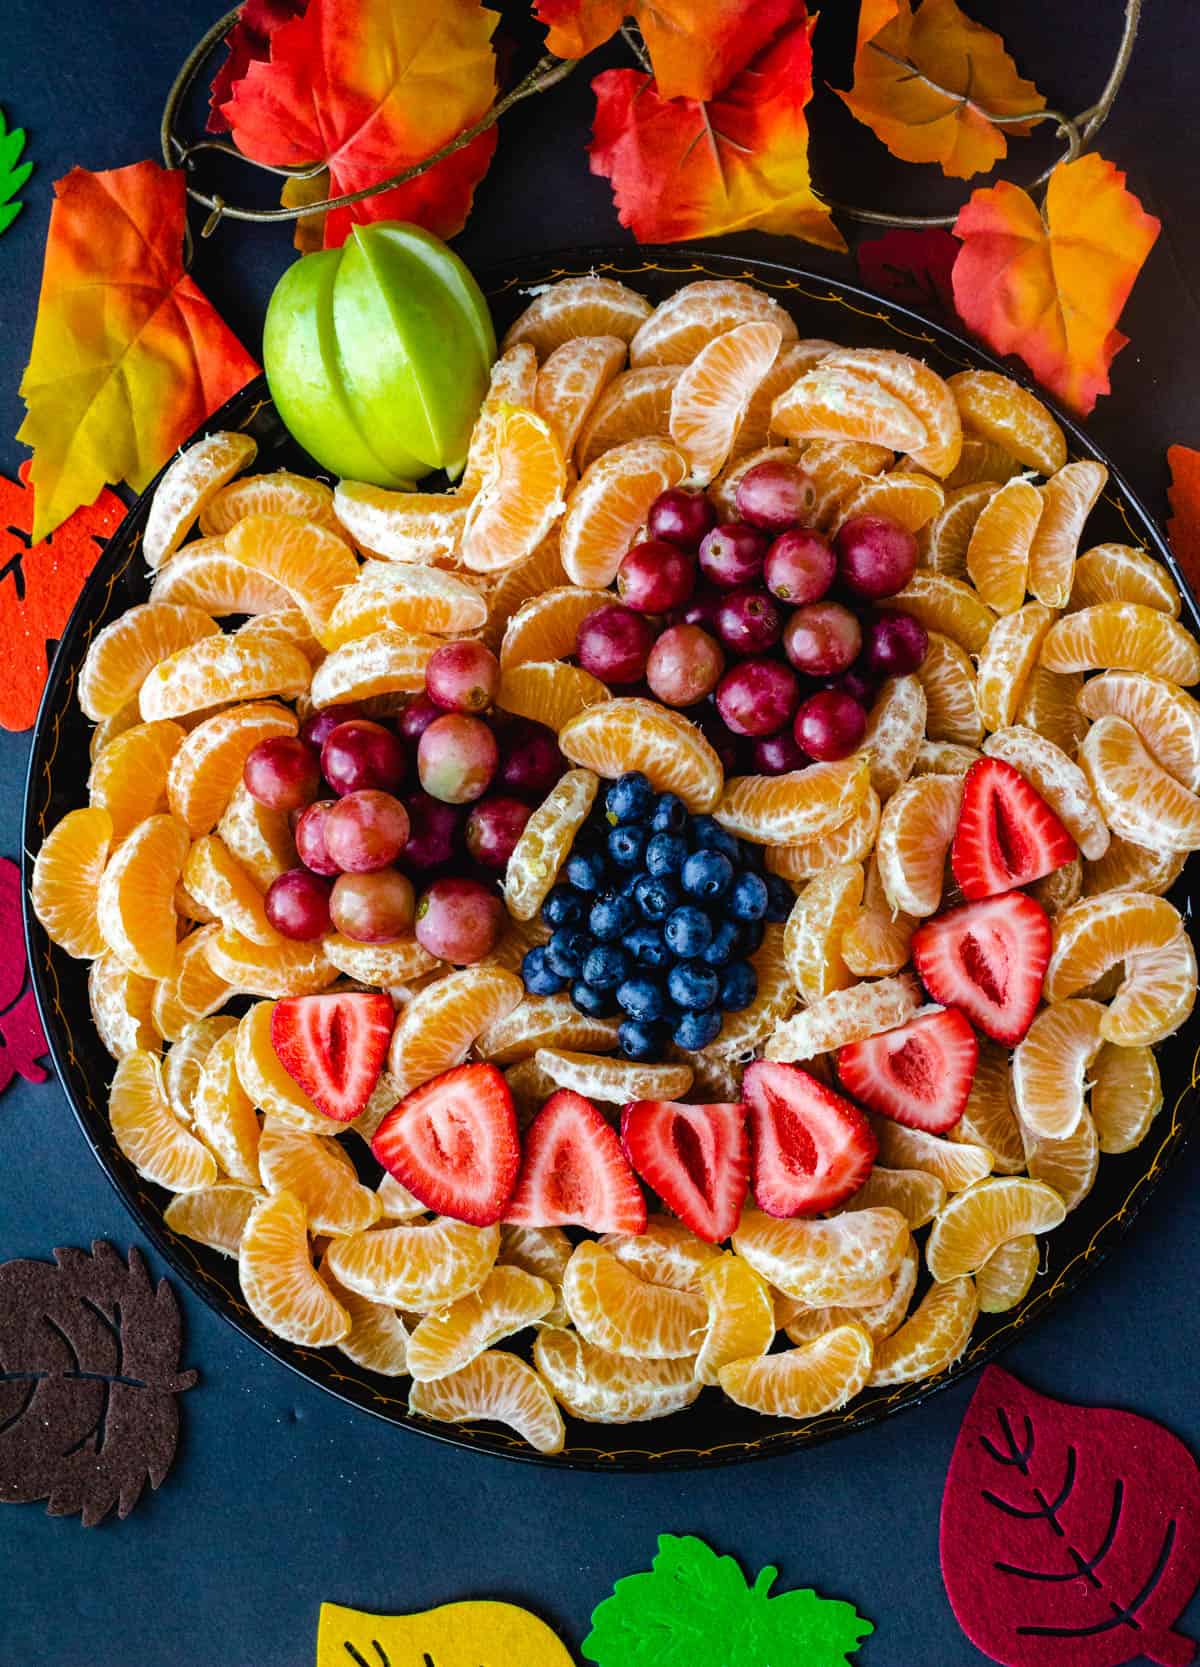 jack-o-lantern fruit tray with oranges, berries, and grapes